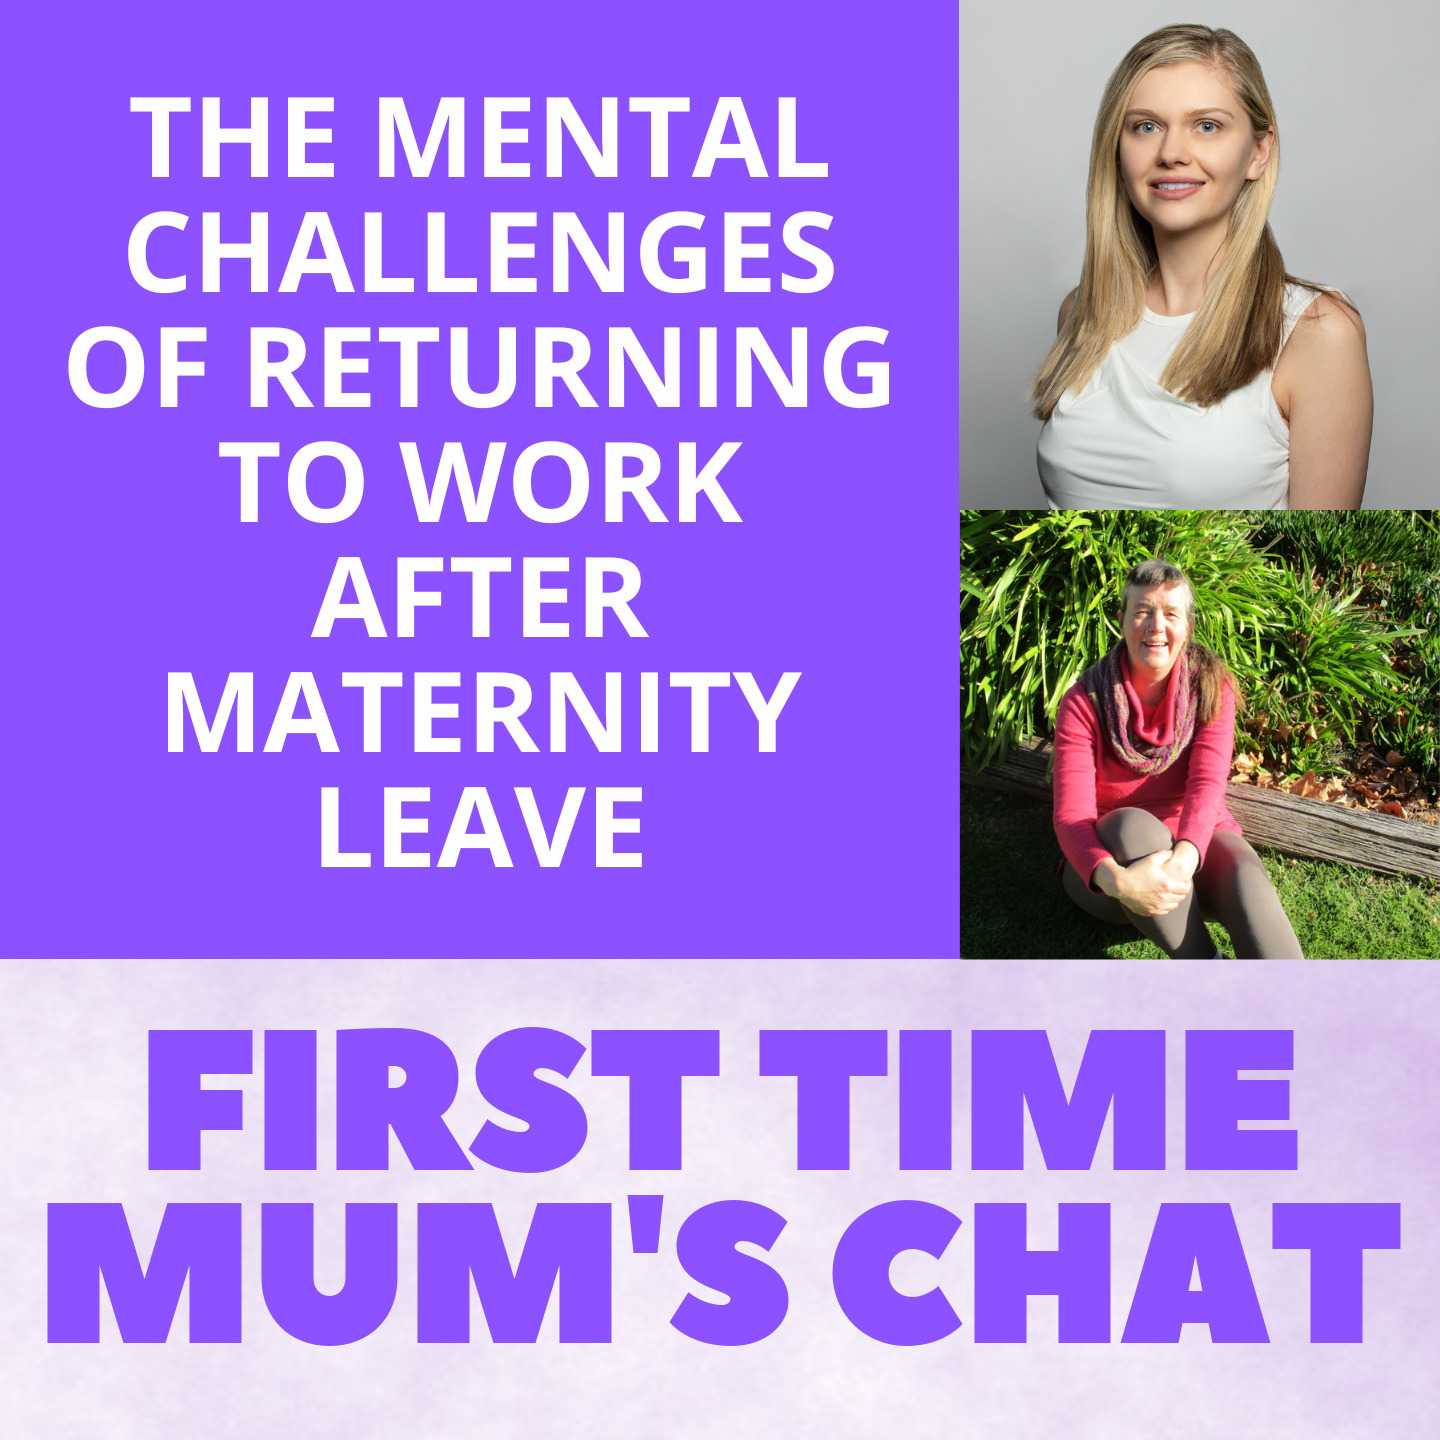 The Mental Challenges of Returning to Work After Maternity Leave